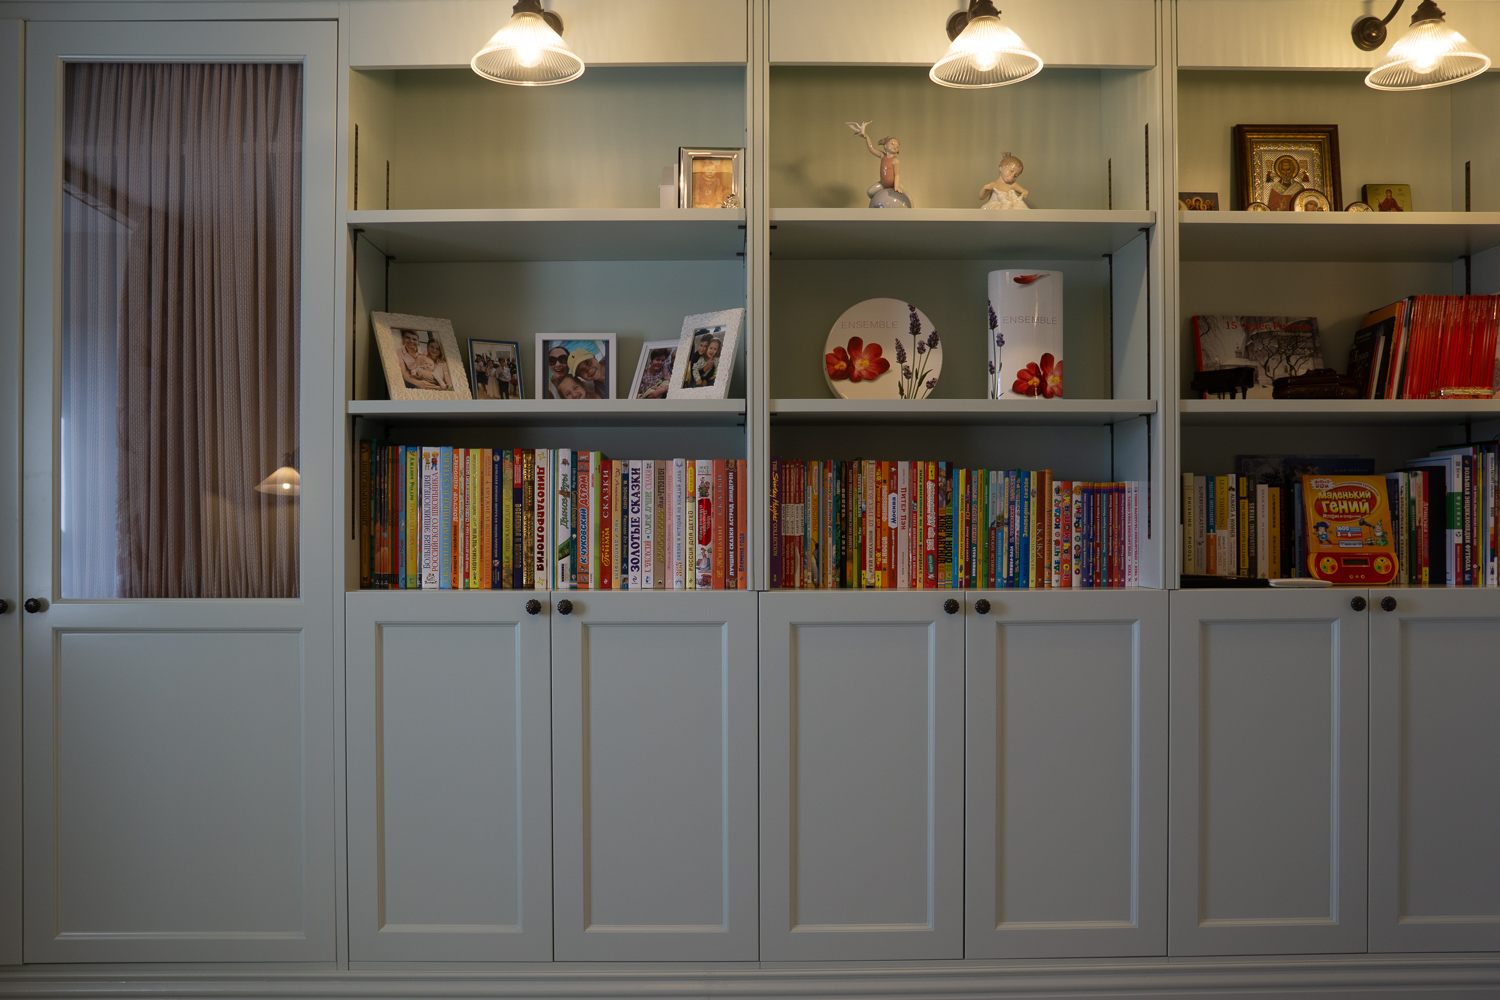 Wardrobe & shelving, Glass doored wardrobe with cabinets and shelves built around chimney breast.
